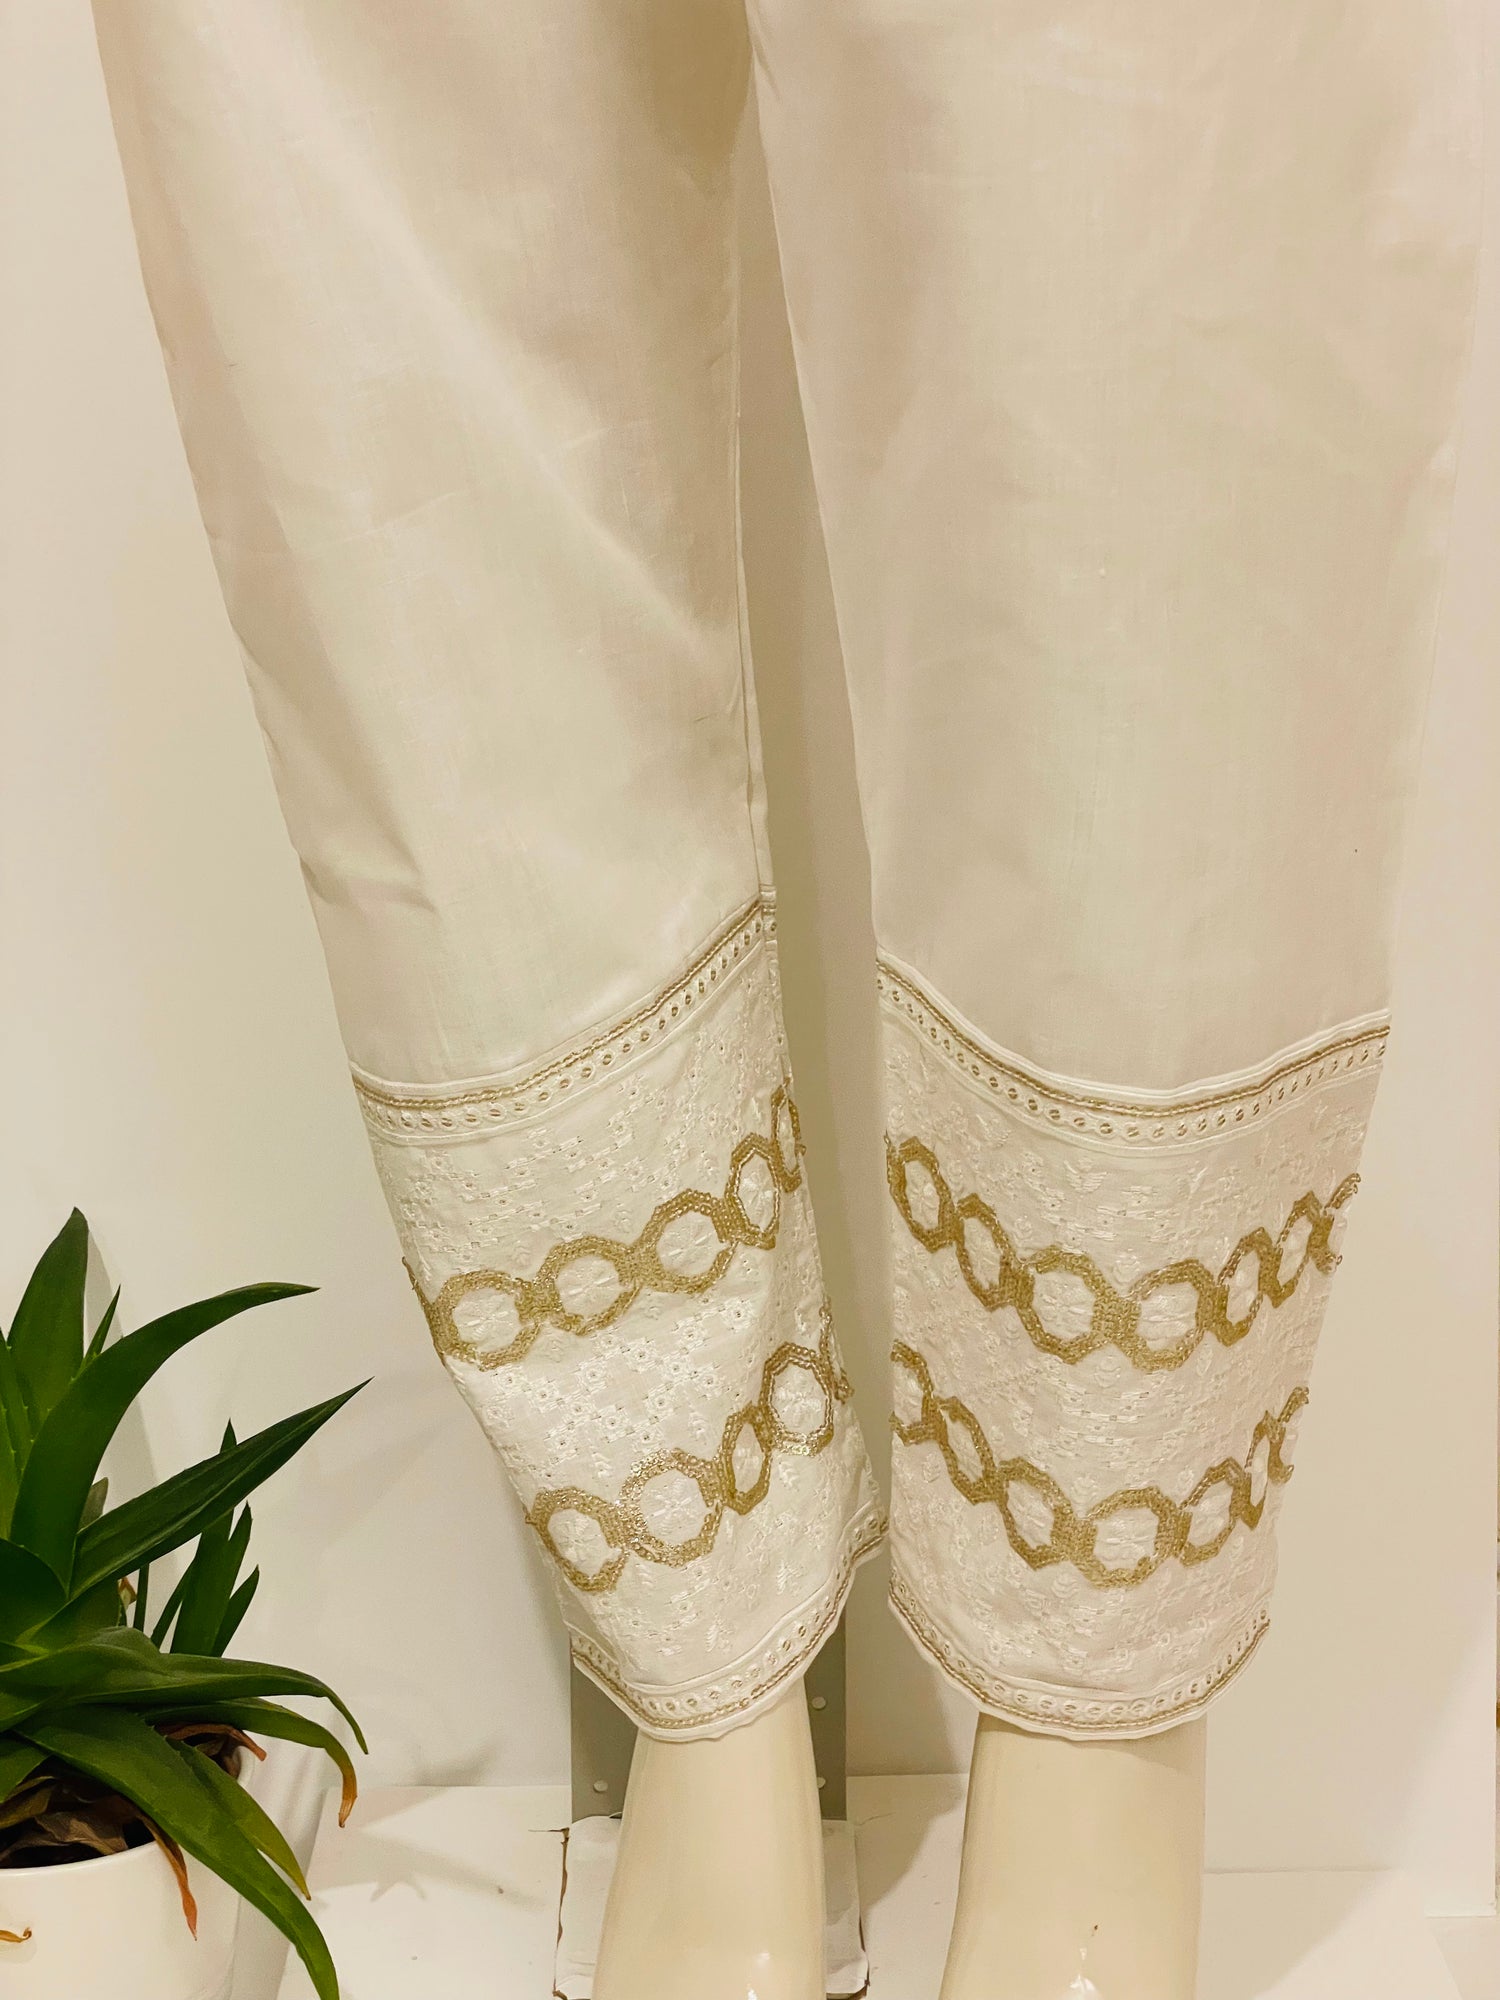 New pant design women OFF-WHITE cotton stretchable pants with Embroidery  kashmiri work trending , formal ladies